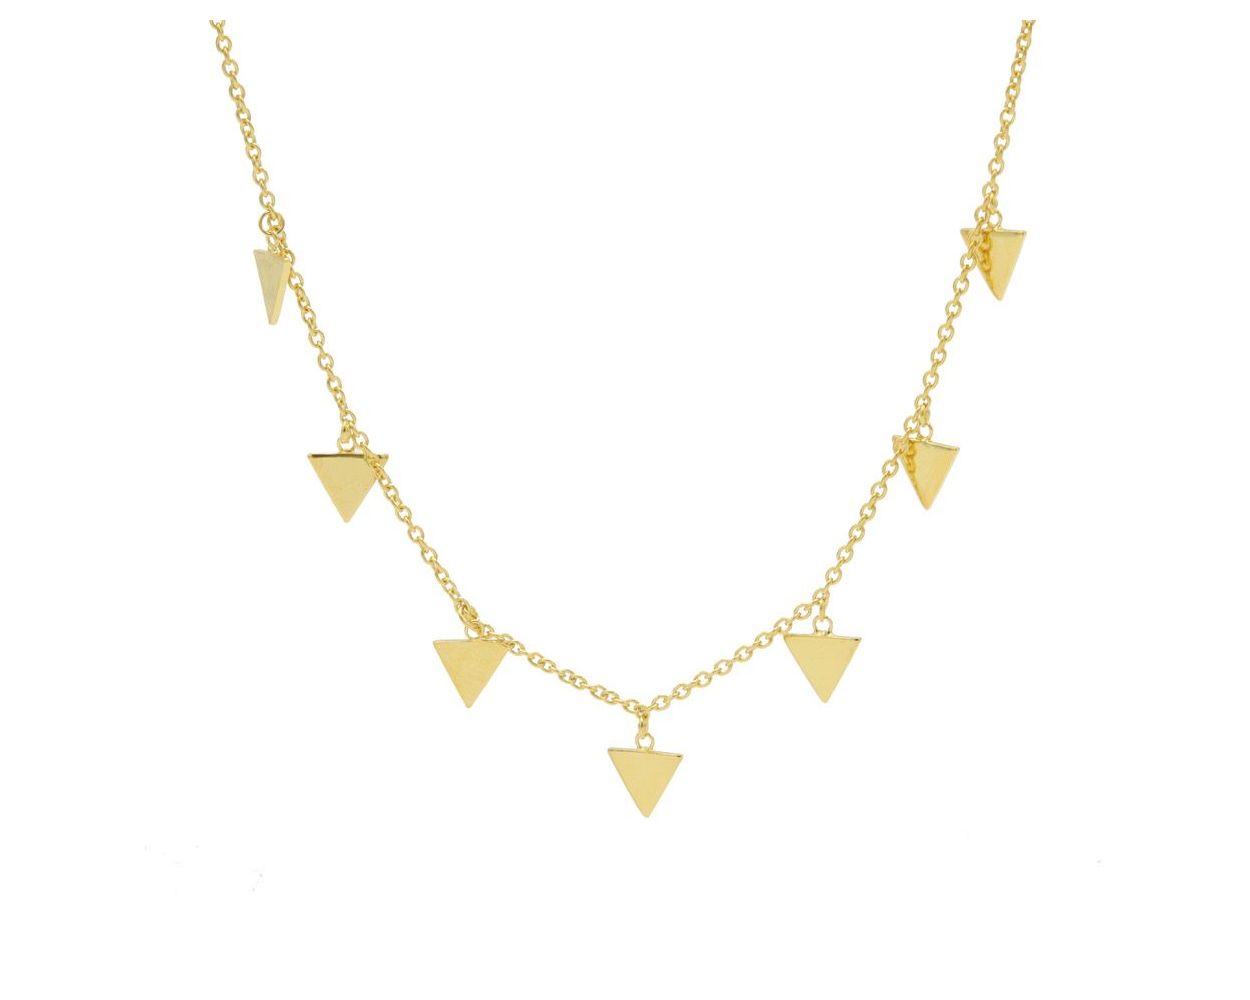 Karma Necklace 7 Triangles - Gold plated